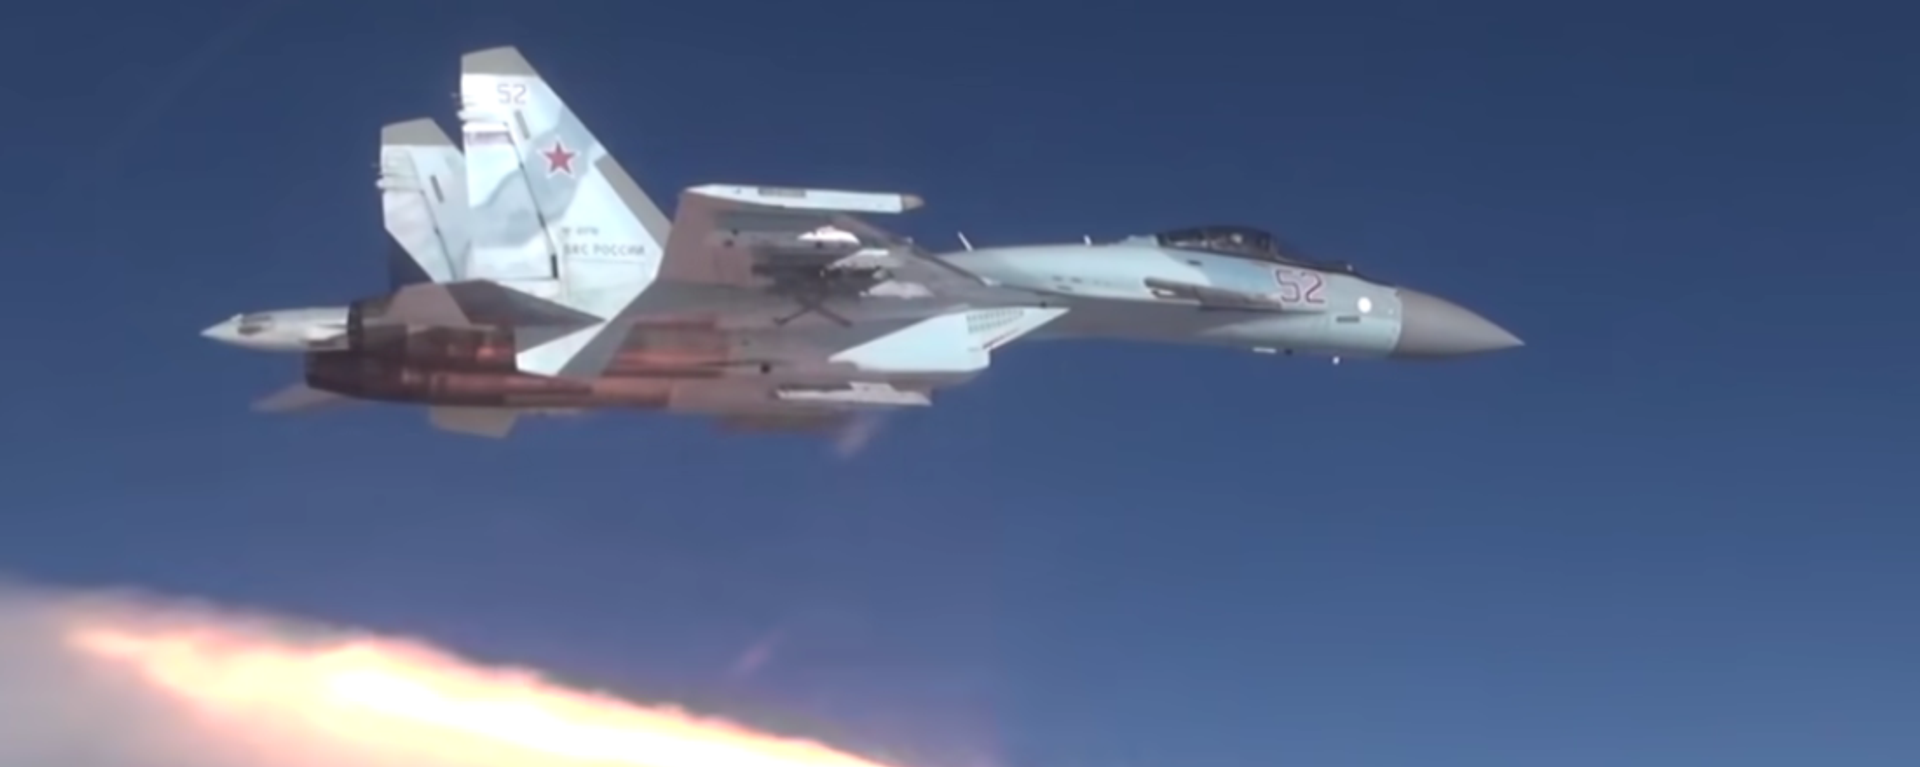 A Russian Su-35S fighter jet fires what appears to be an R-37M ultra-long-range air-to-air missile in a promotional video by the Russian Ministry of Defense - Sputnik Srbija, 1920, 11.03.2023